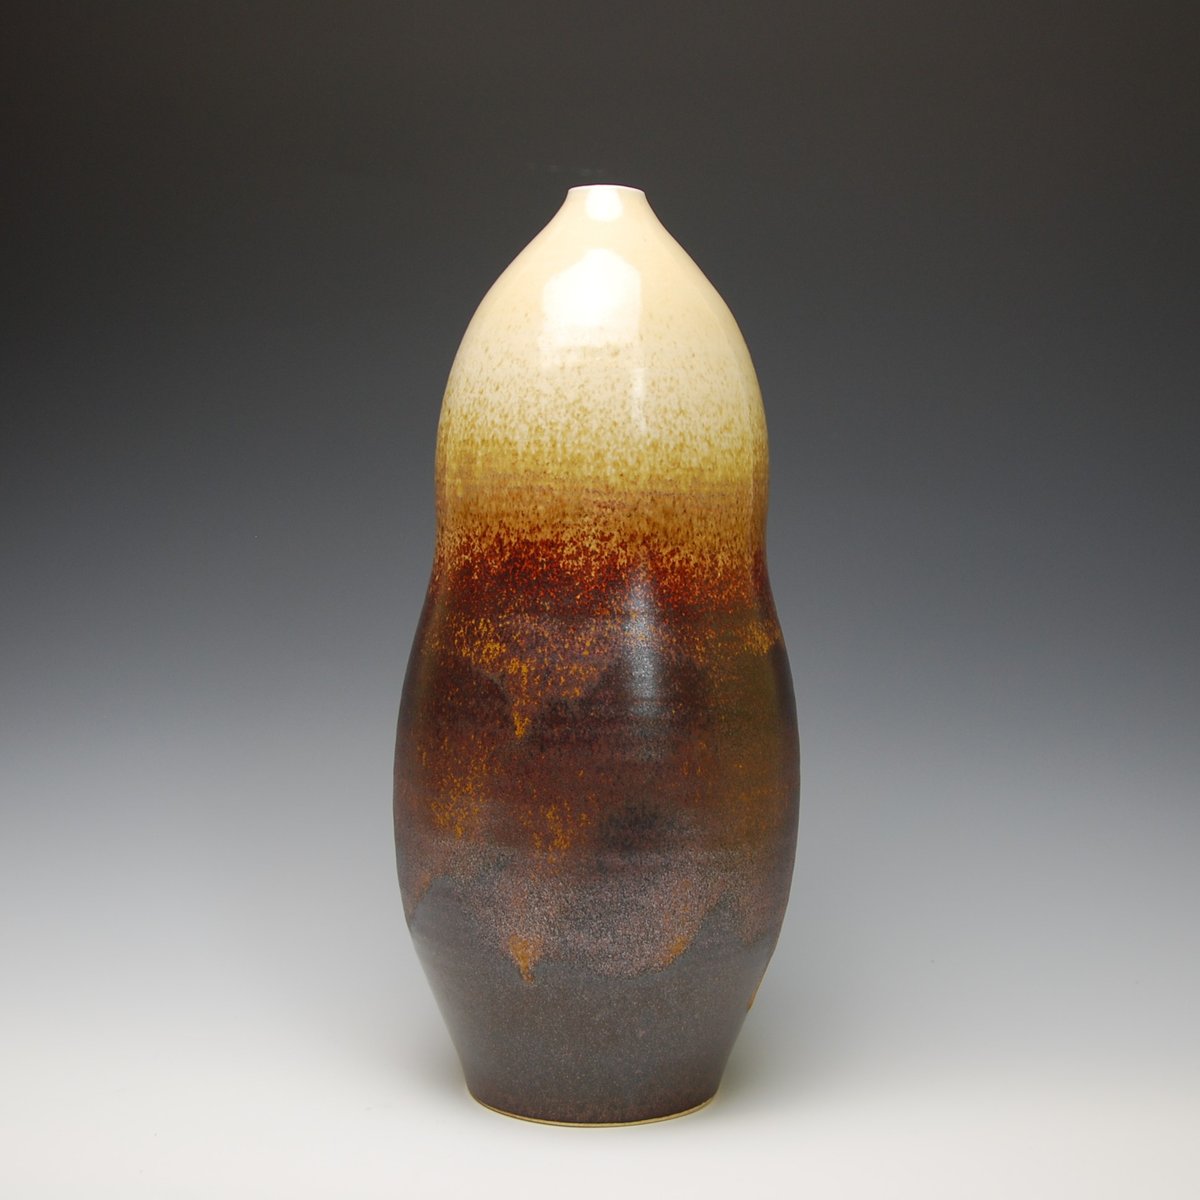 Image of Large, Narrow Vessel in Copper and White Sprayed Glaze